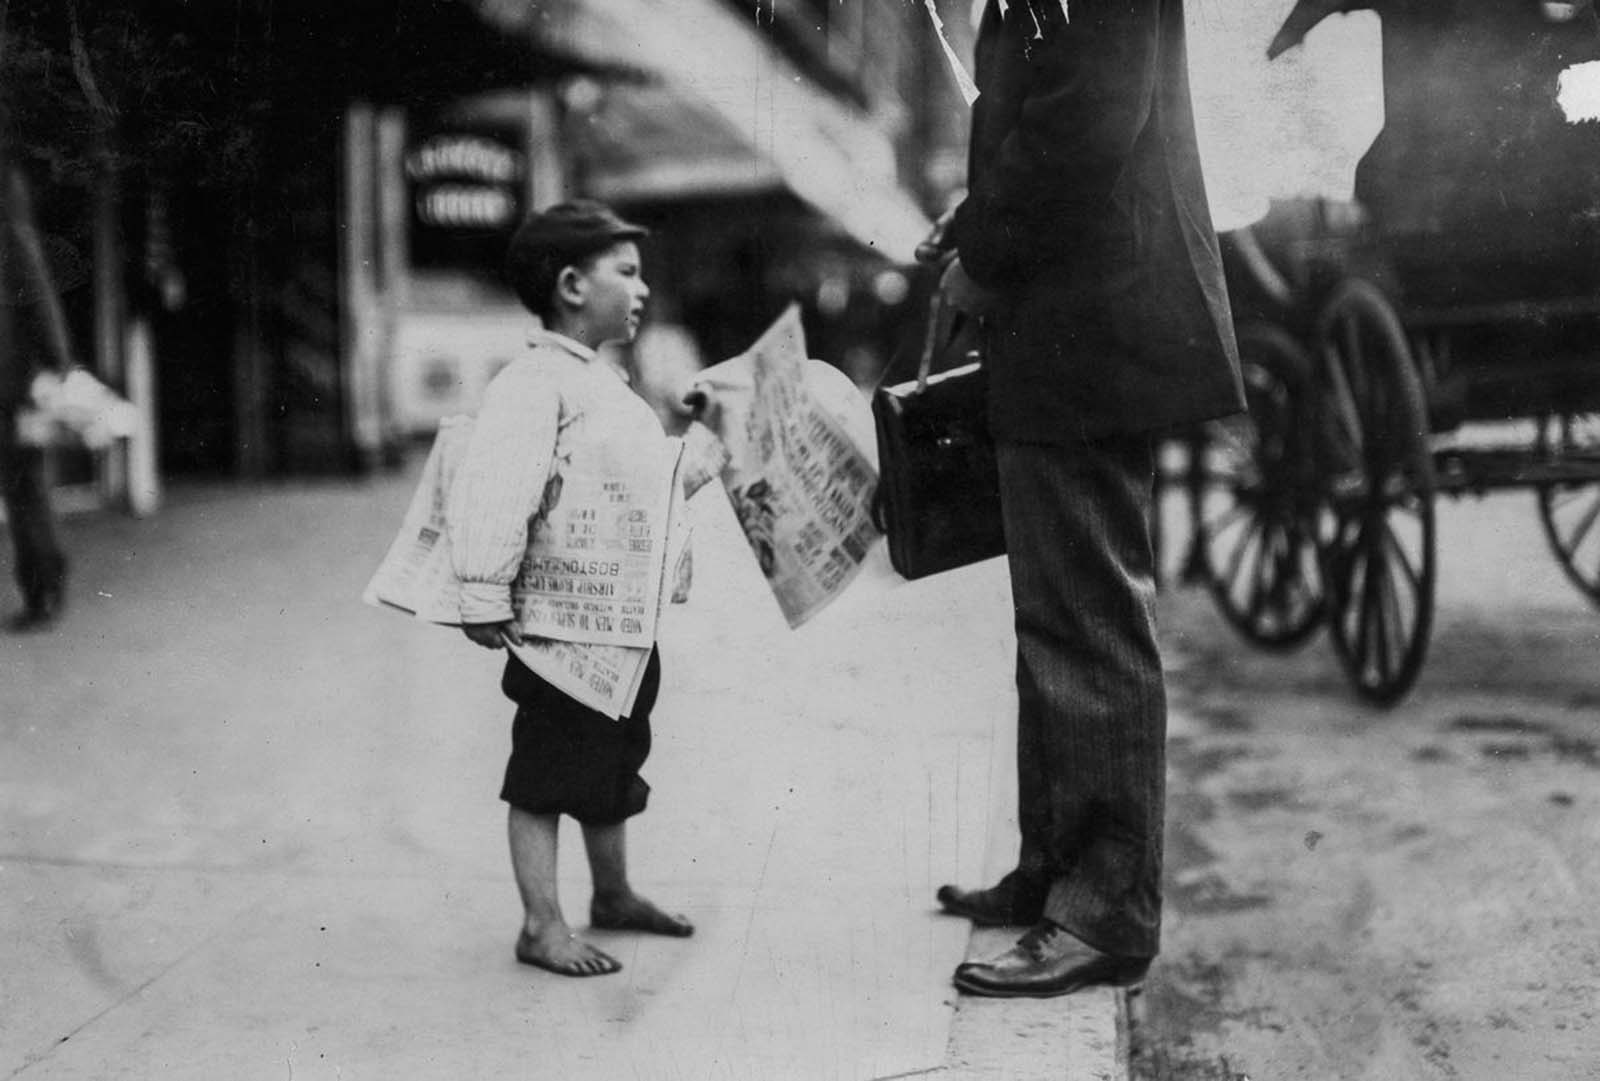 Hyman, six year old newsie. Another six year old newsie said he sold until 6 p.m. Lawrence, Massachusetts, 1911.